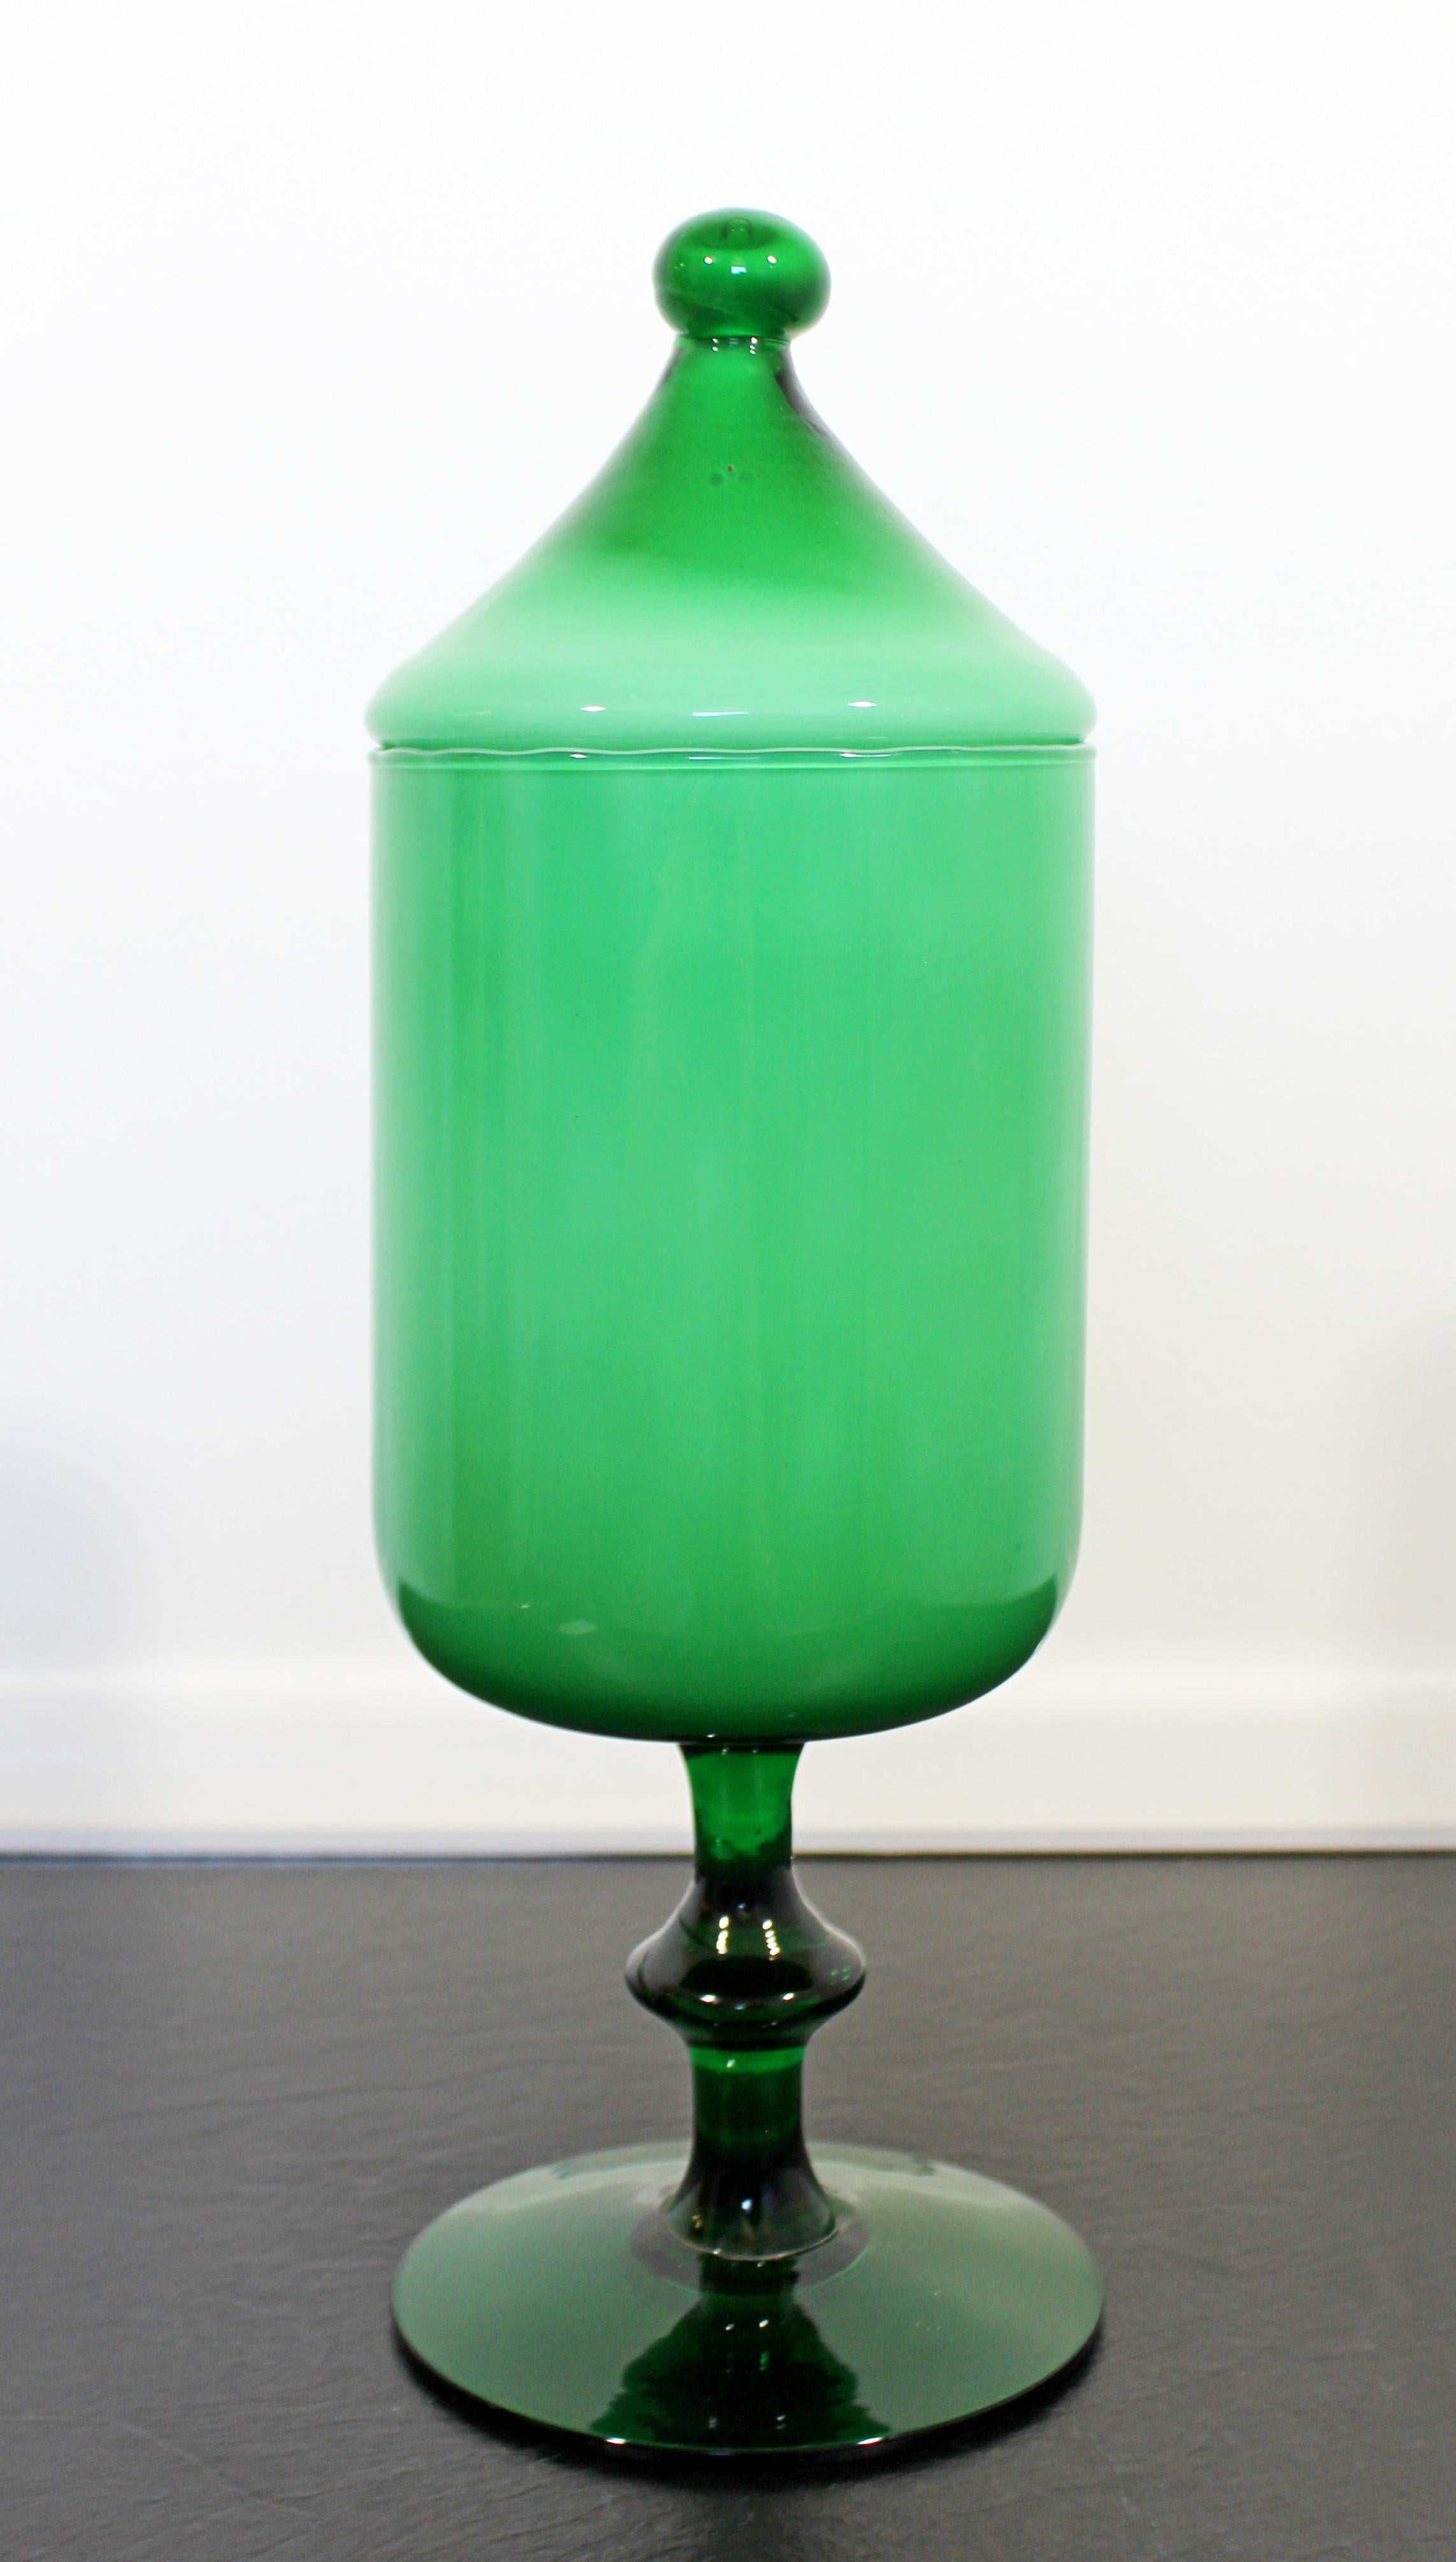 For your consideration is a beautiful, green glass lidded vessel, made in Empoli, Italy, circa 1960s. In excellent condition. The dimensions are 5